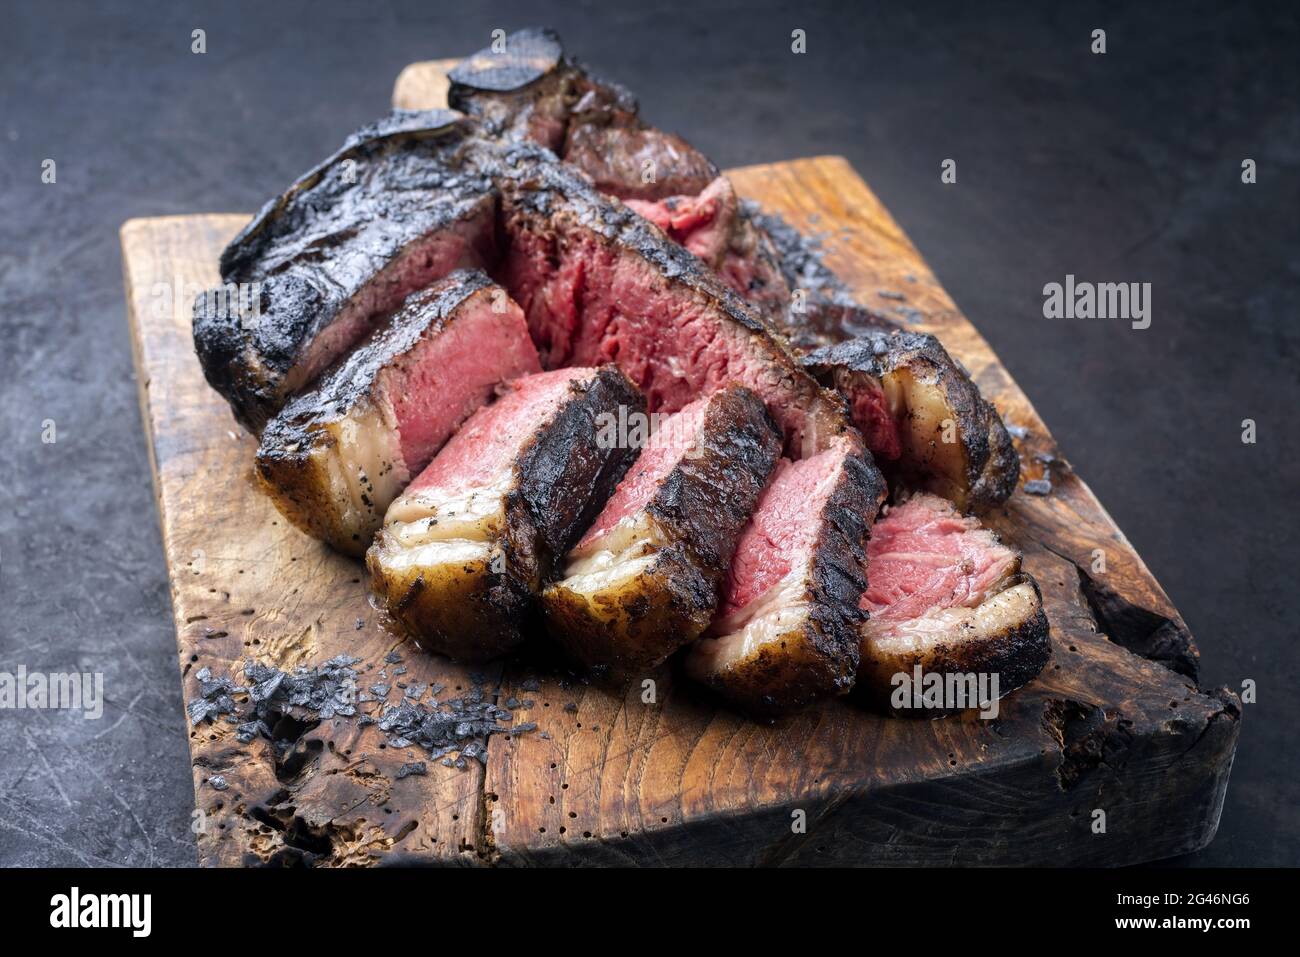 Traditional barbecue dry aged wagyu t-bone beef steak bistecca alla Fiorentina sliced and served with black salt as close-up on Stock Photo